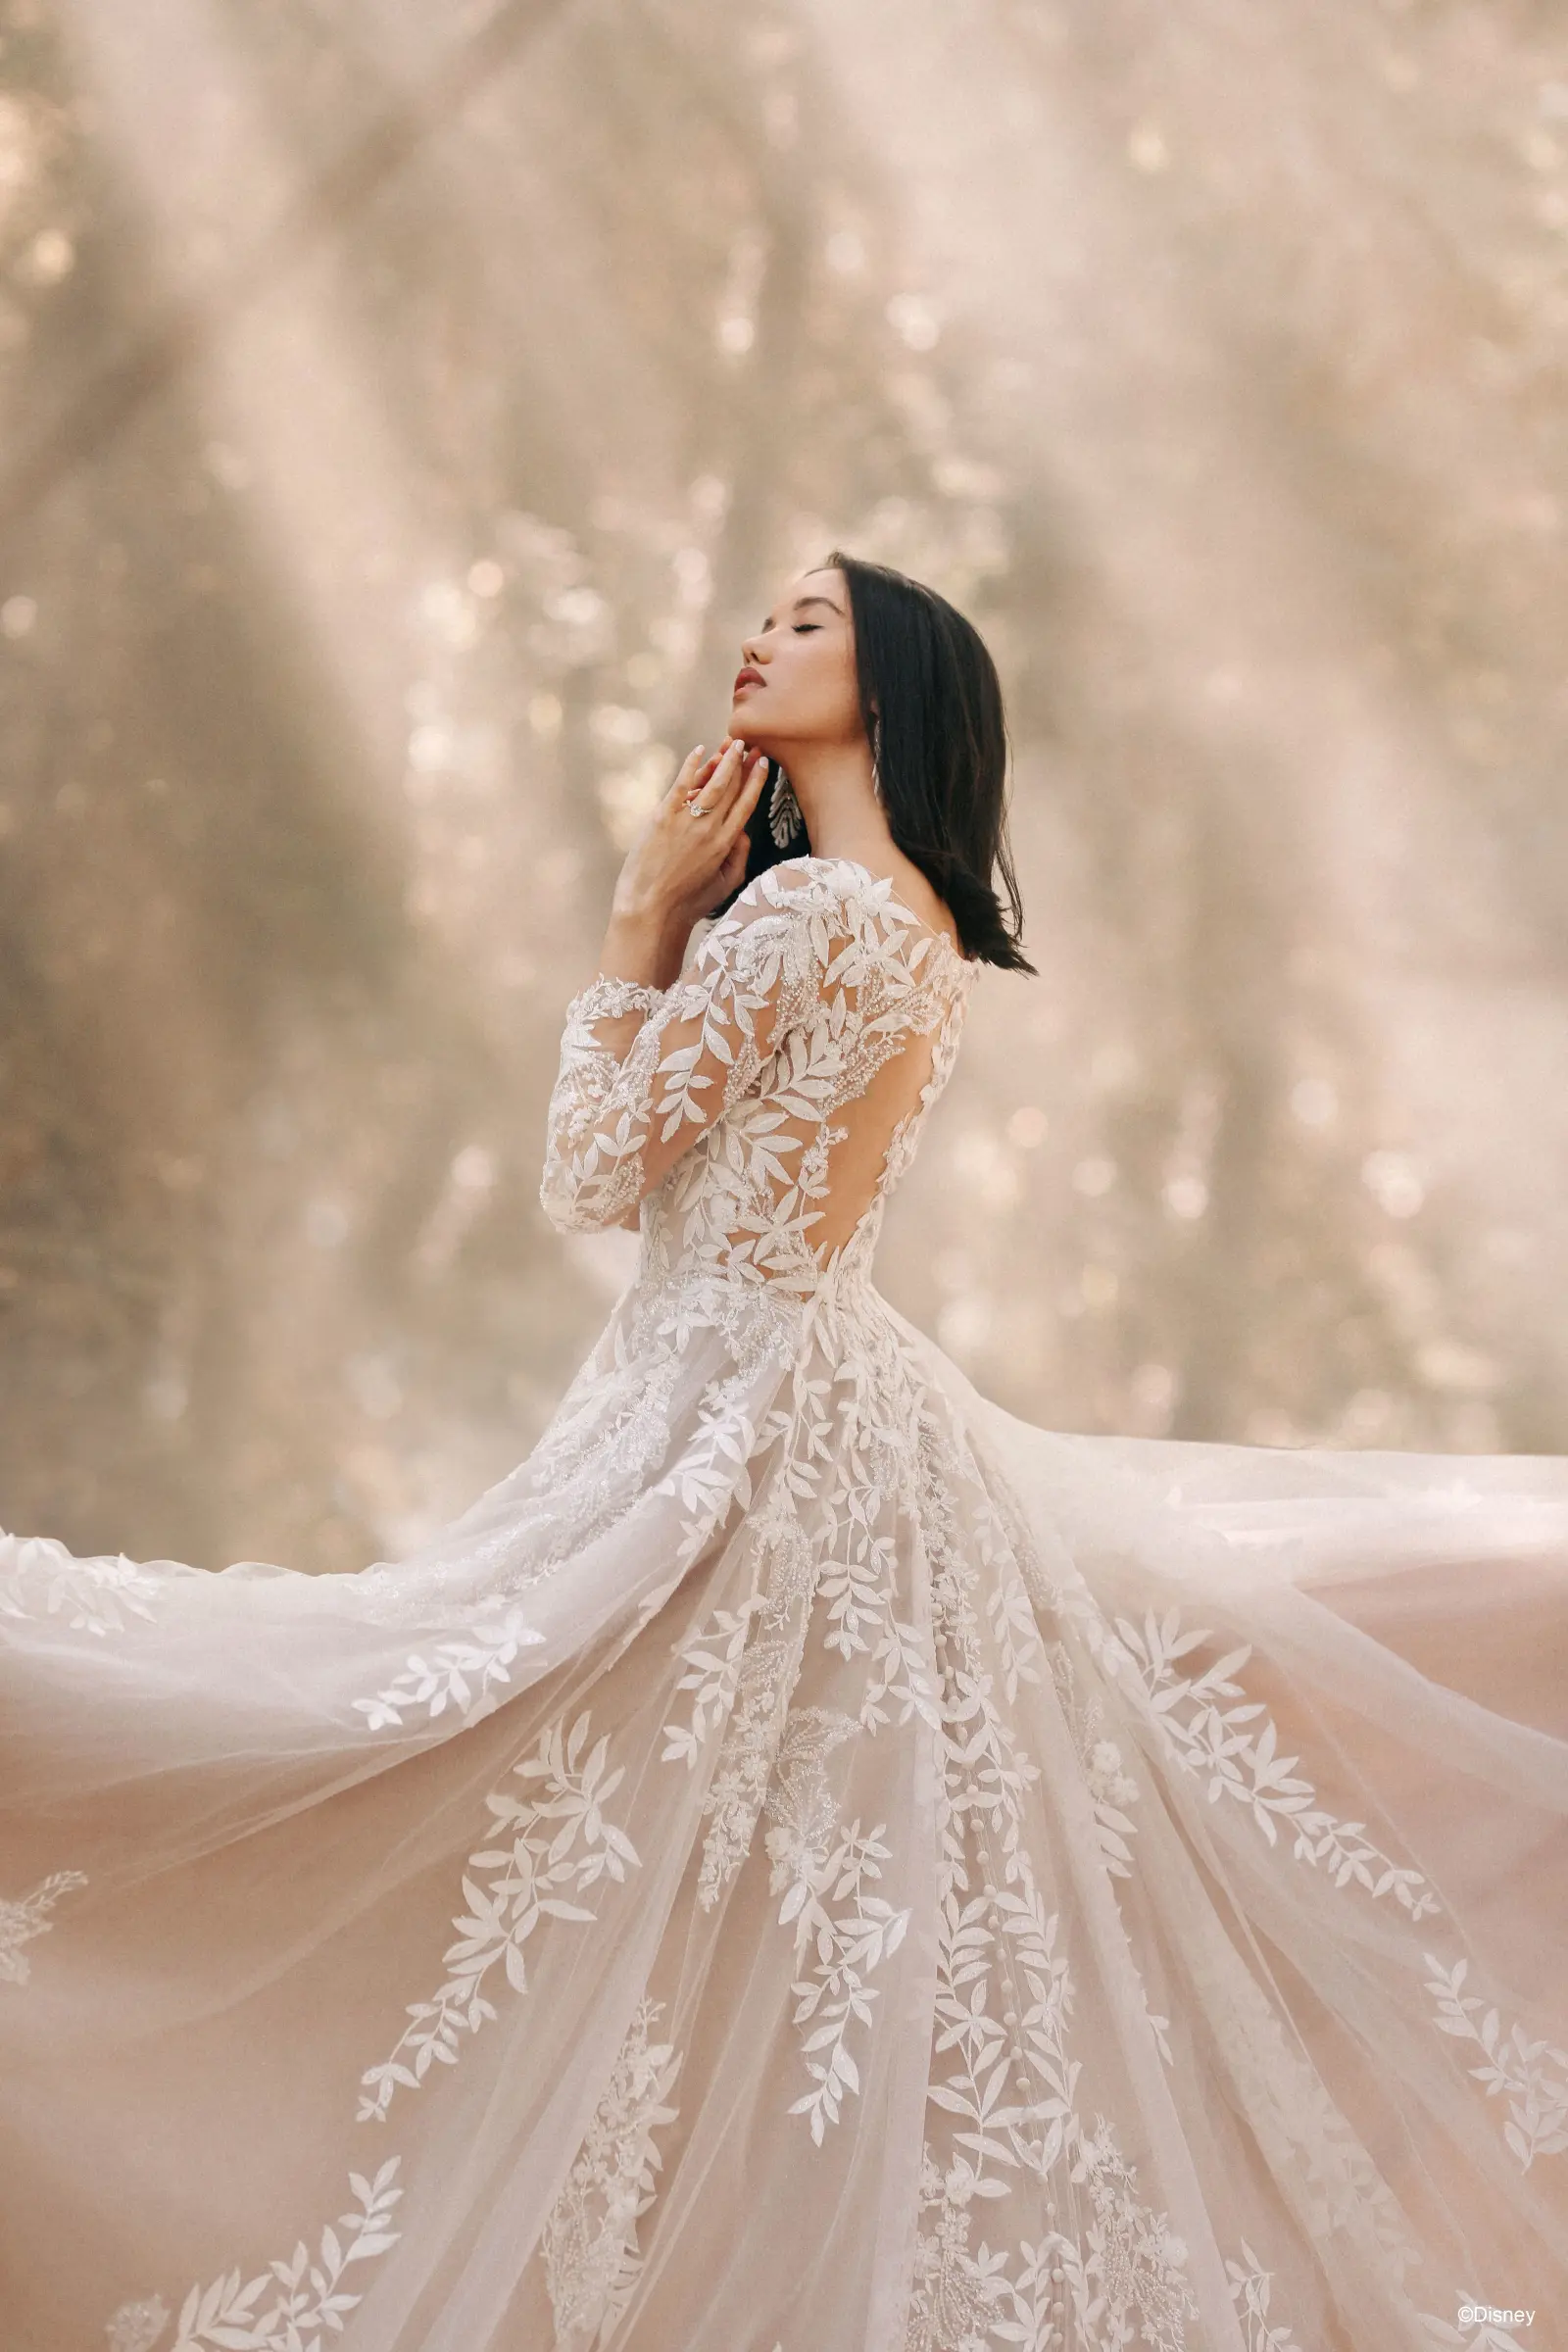 Embrace Classic Romance with Long Sleeve Wedding Dresses on Your